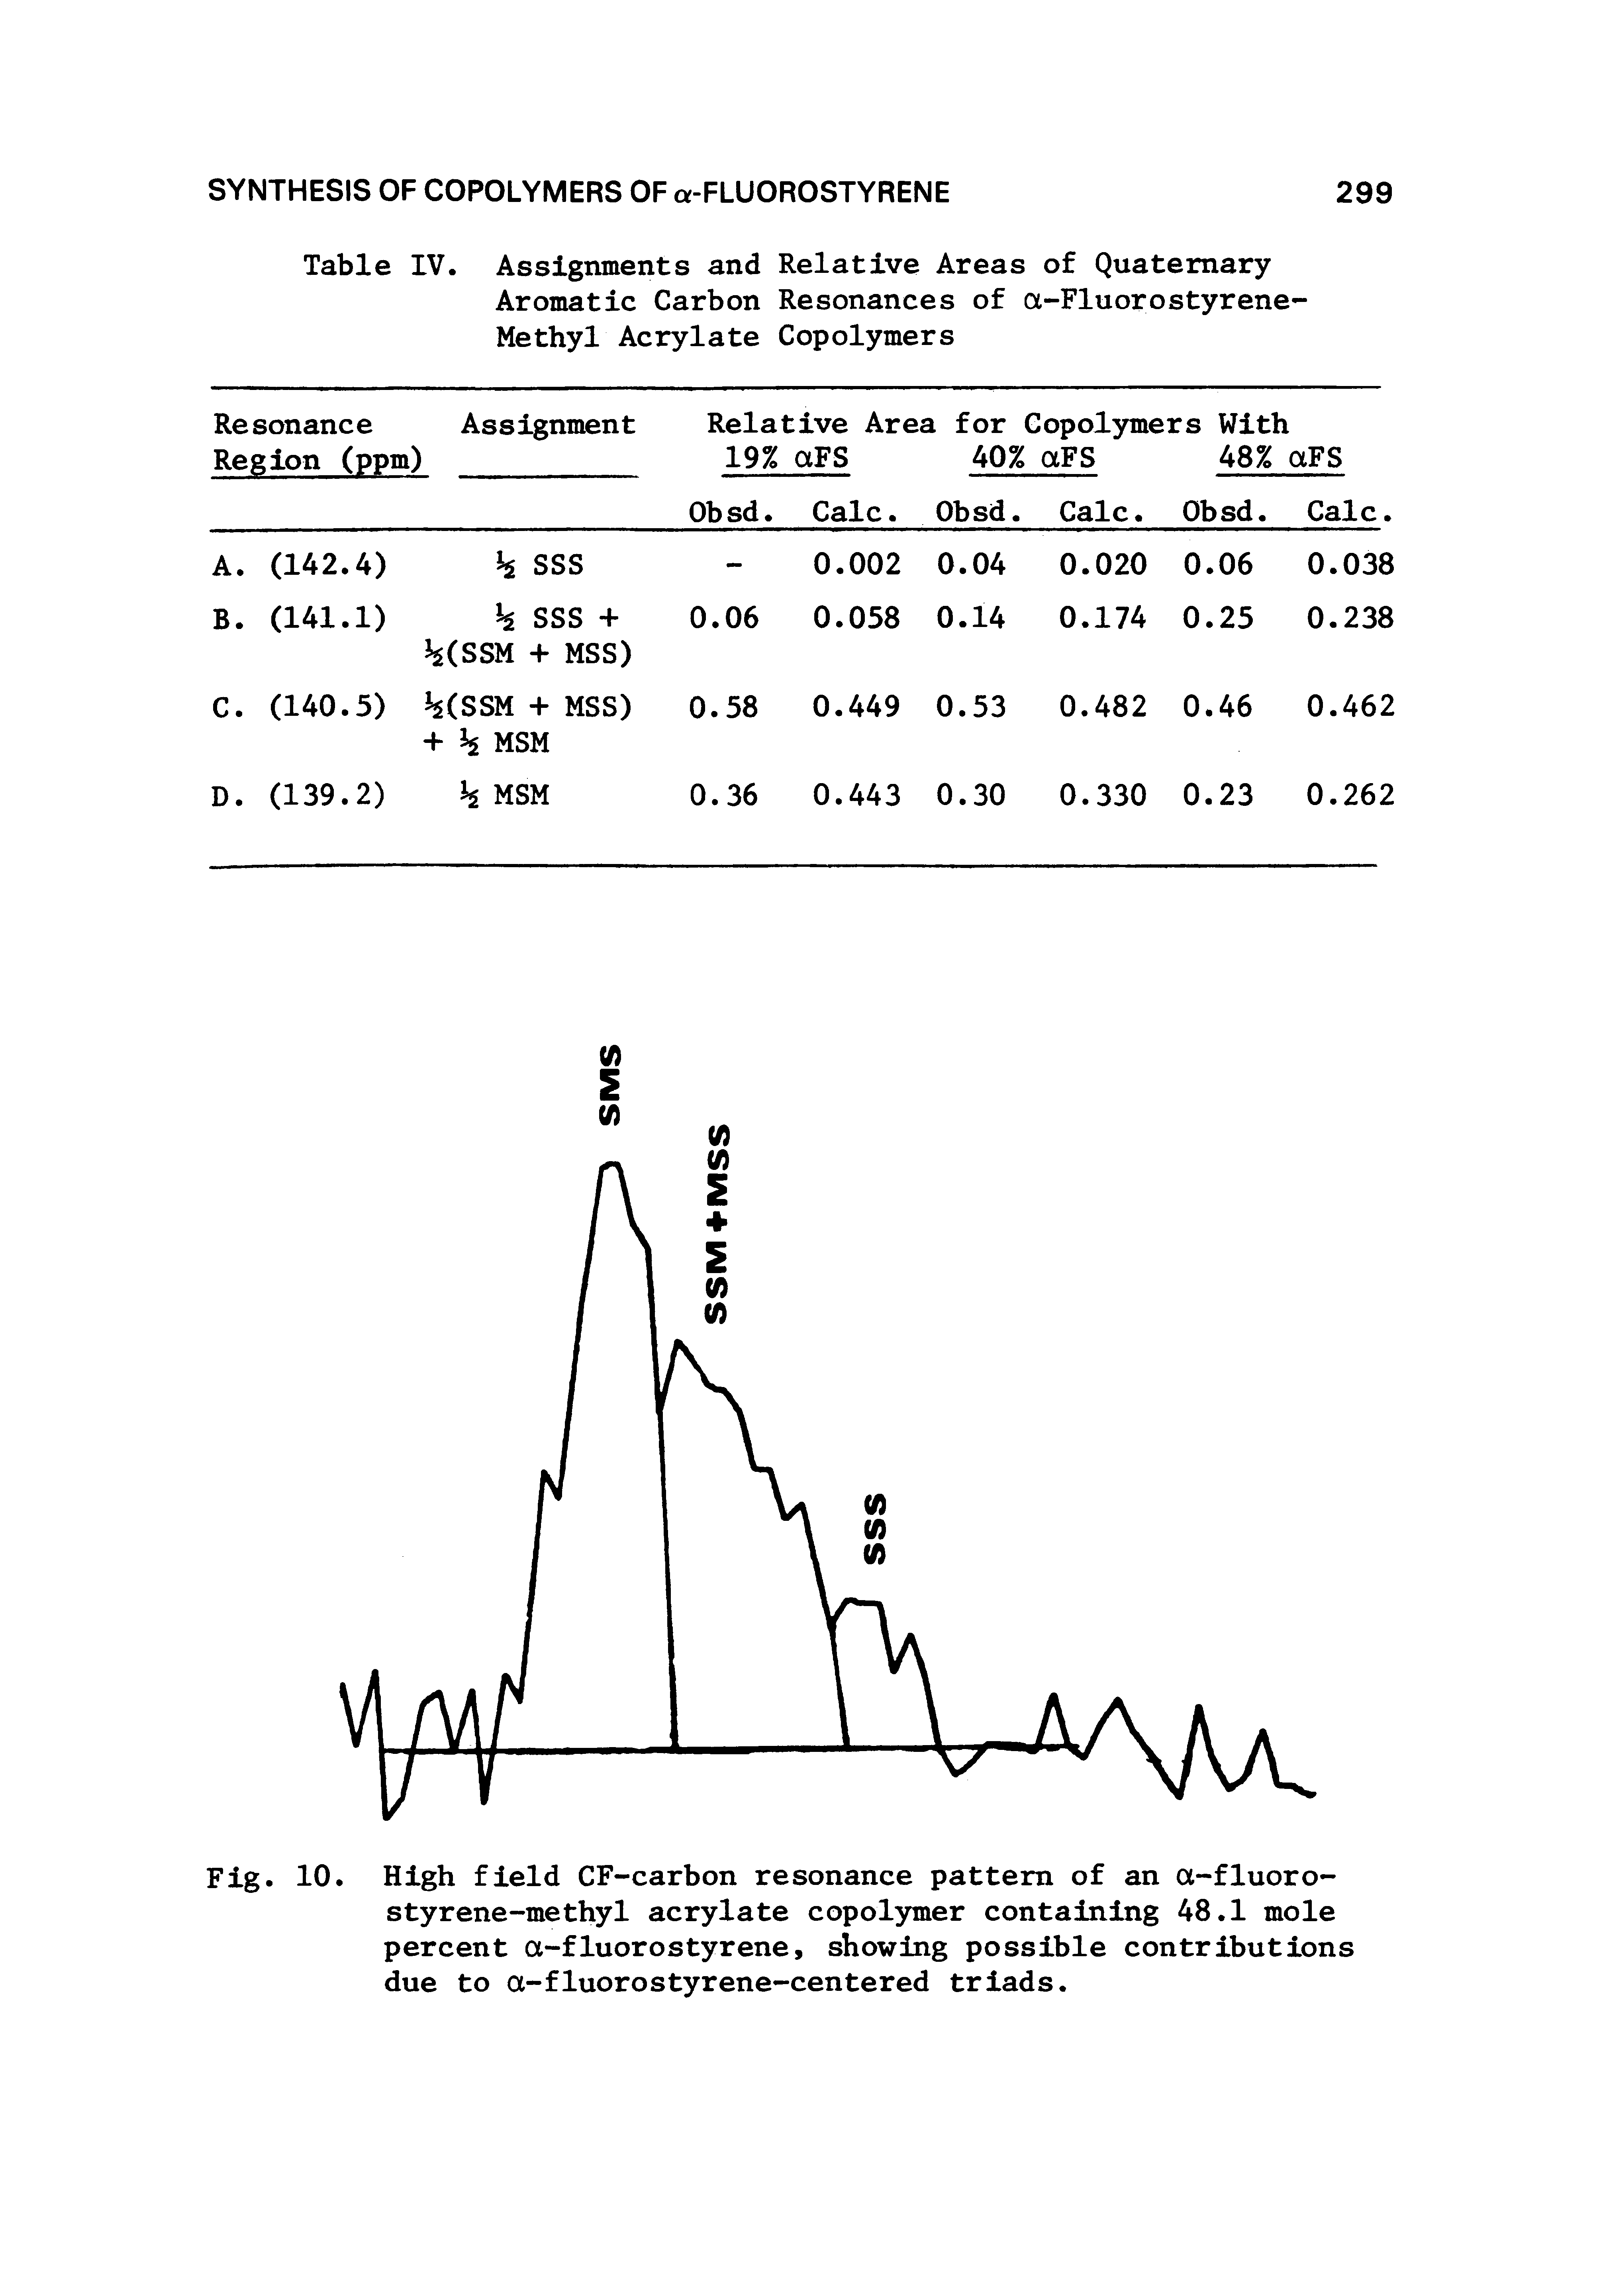 Fig. 10. High field CF-carbon resonance pattern of an a-fluoro-styrene-methyl acrylate copolymer containing 48.1 mole percent a-fluorostyrene, showing possible contributions due to a-fluorostyrene-centered triads.